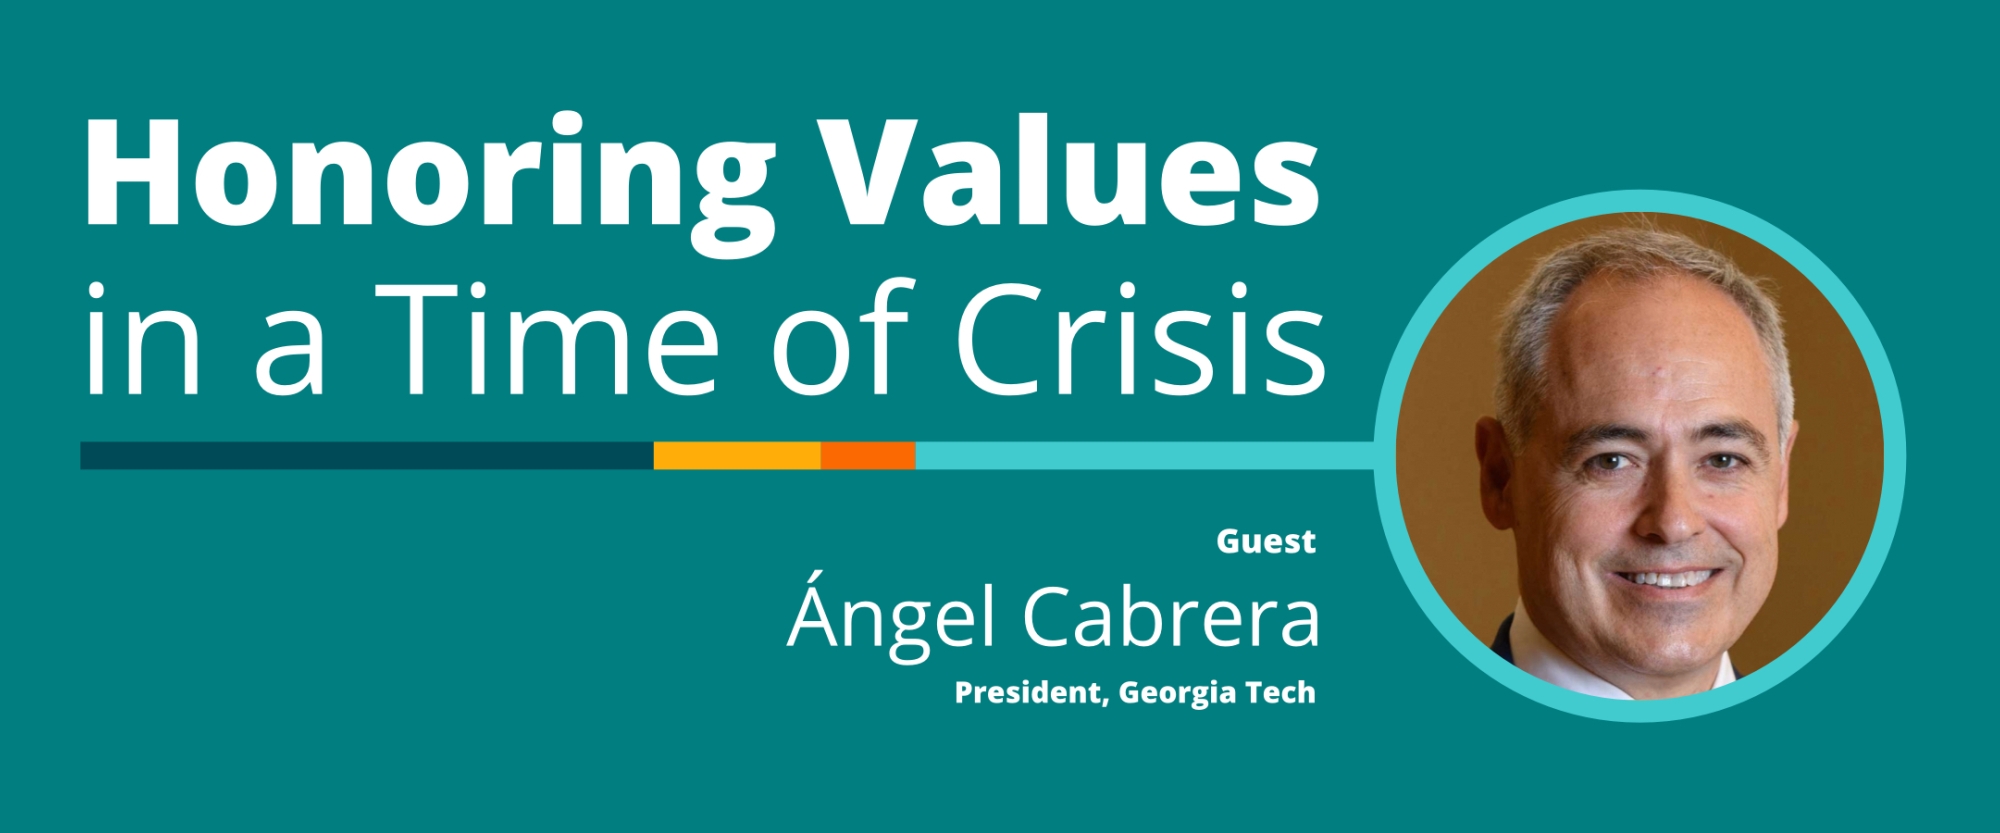 Honoring Values in a Time of Crisis